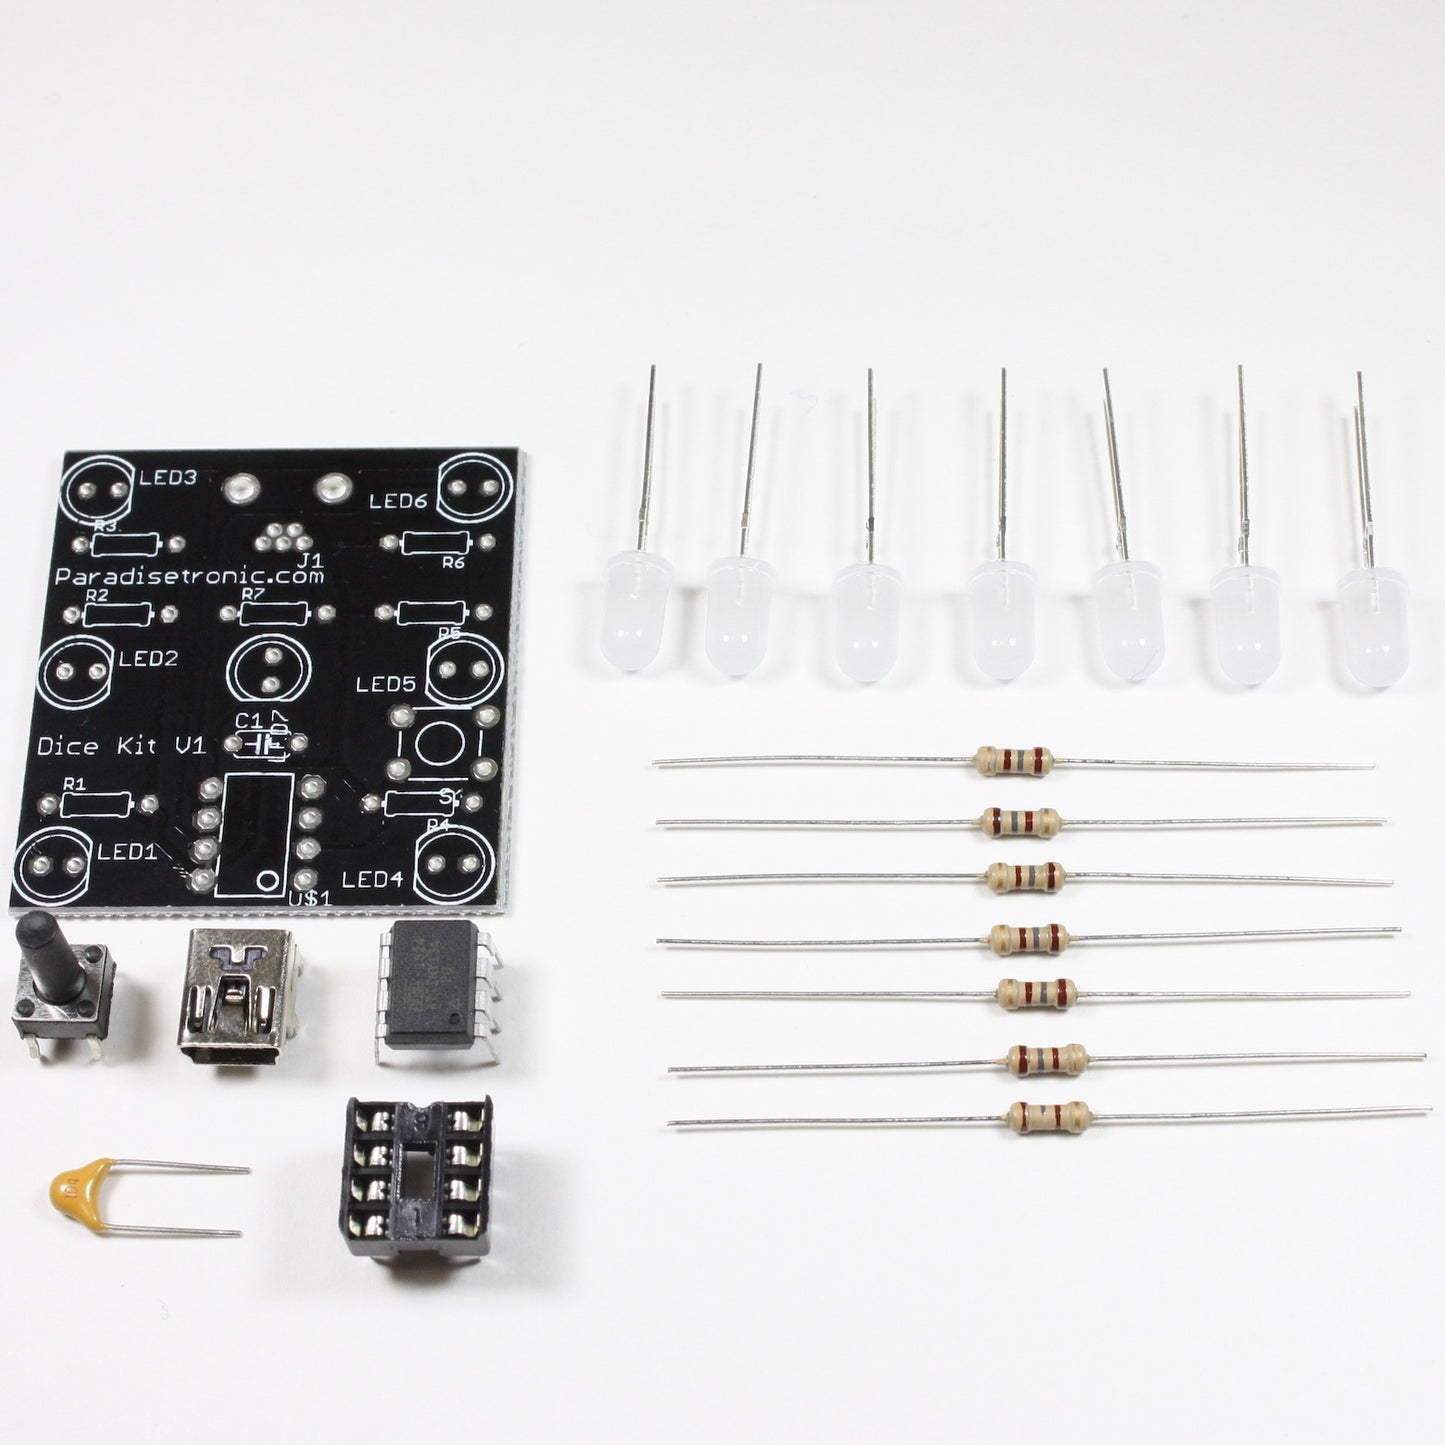 Dice Kit by Paradisetronic.com with bright diffuse LEDs and Atmel AVR Microcontroller